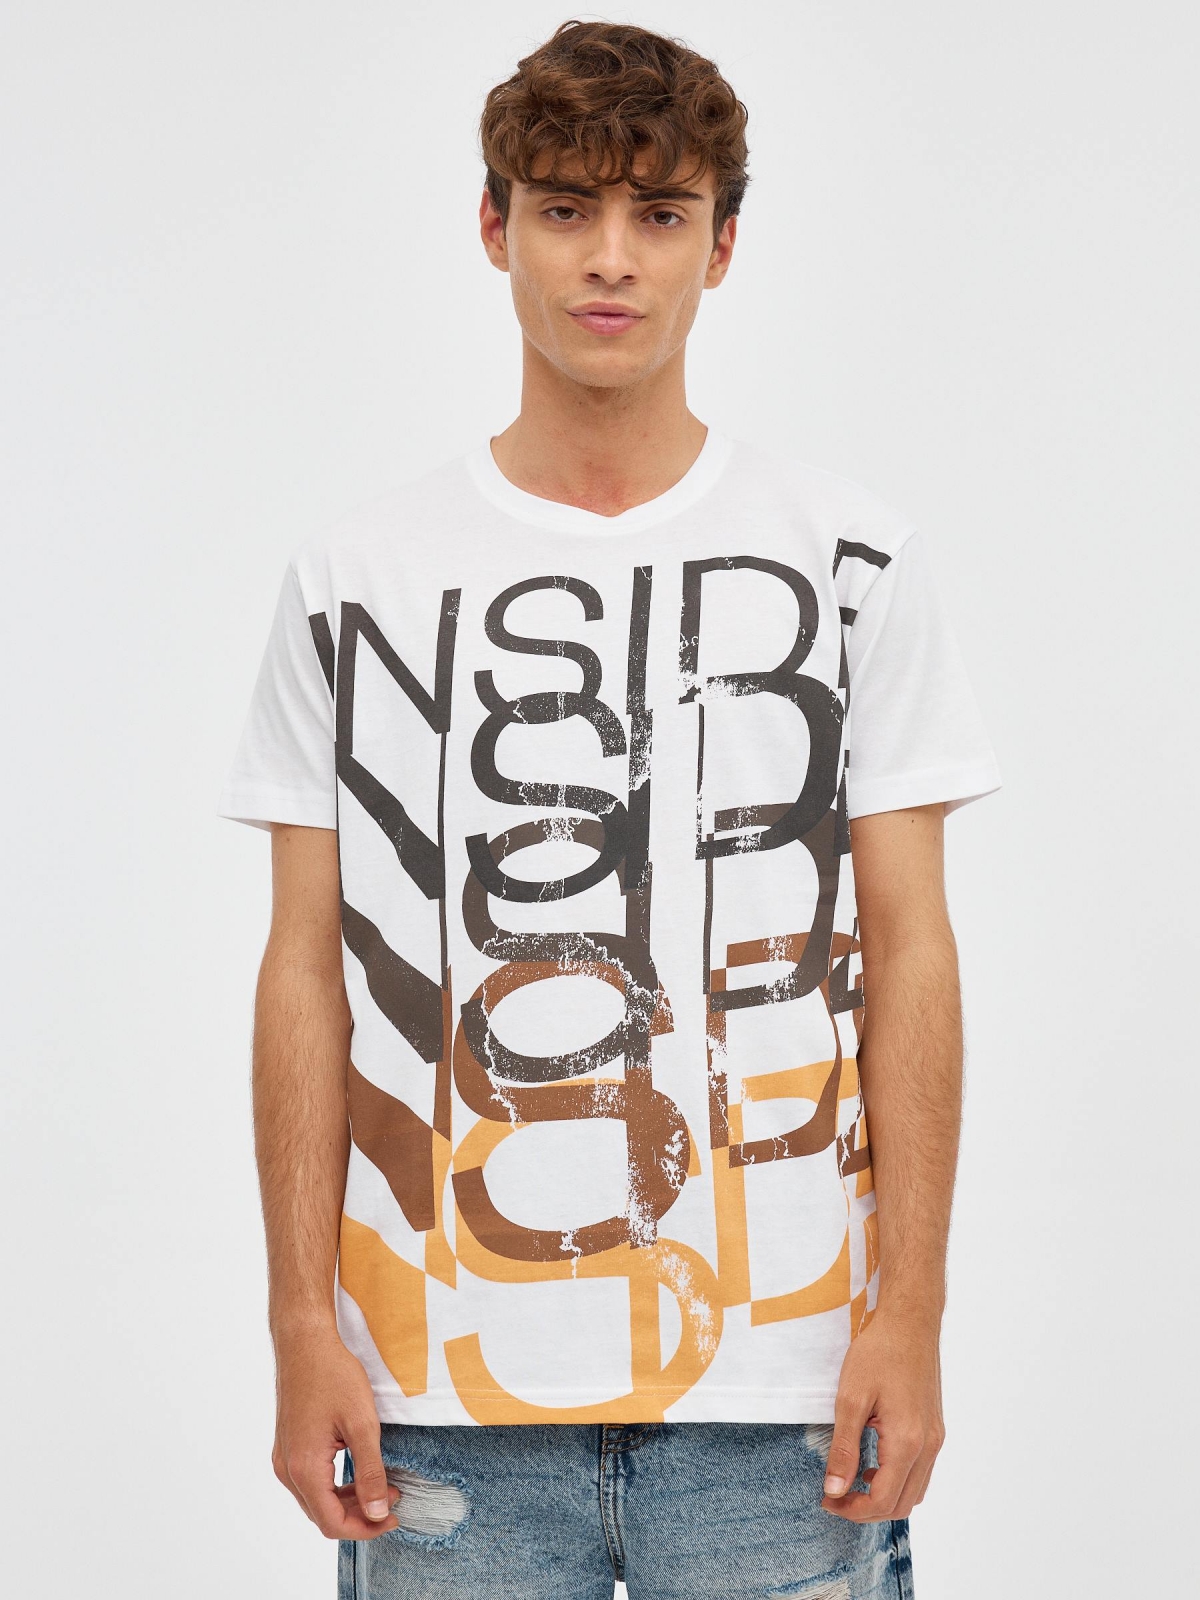 INSIDE print T-shirt white middle front view